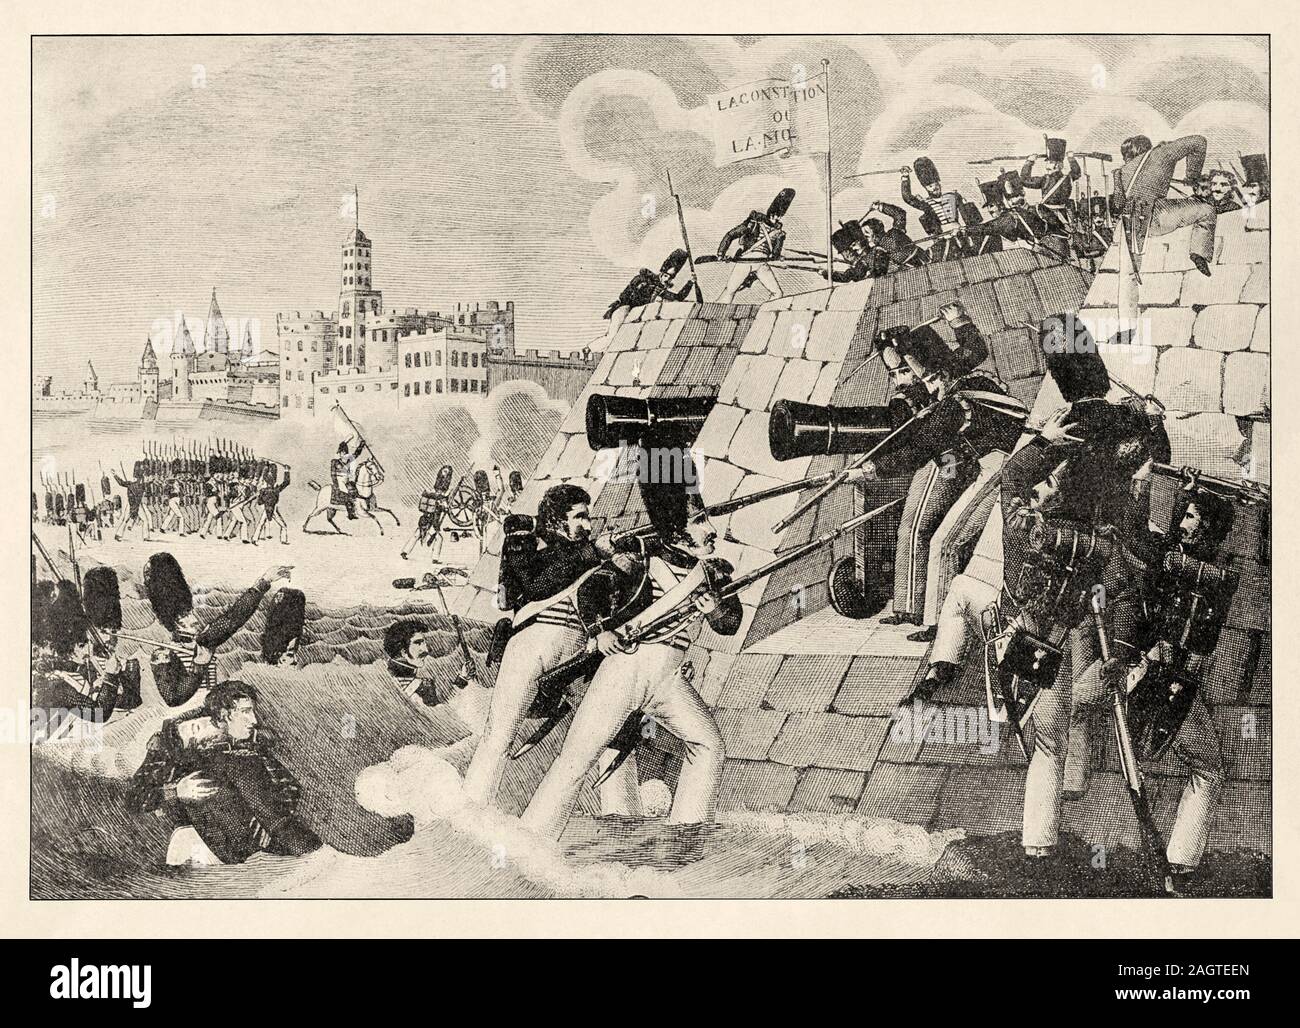 War of Spain. The battle of Fort Trocadero, August 31, 1823 enshrines the victory of a French expeditionary force over the Spanish liberal revolutiona Stock Photo